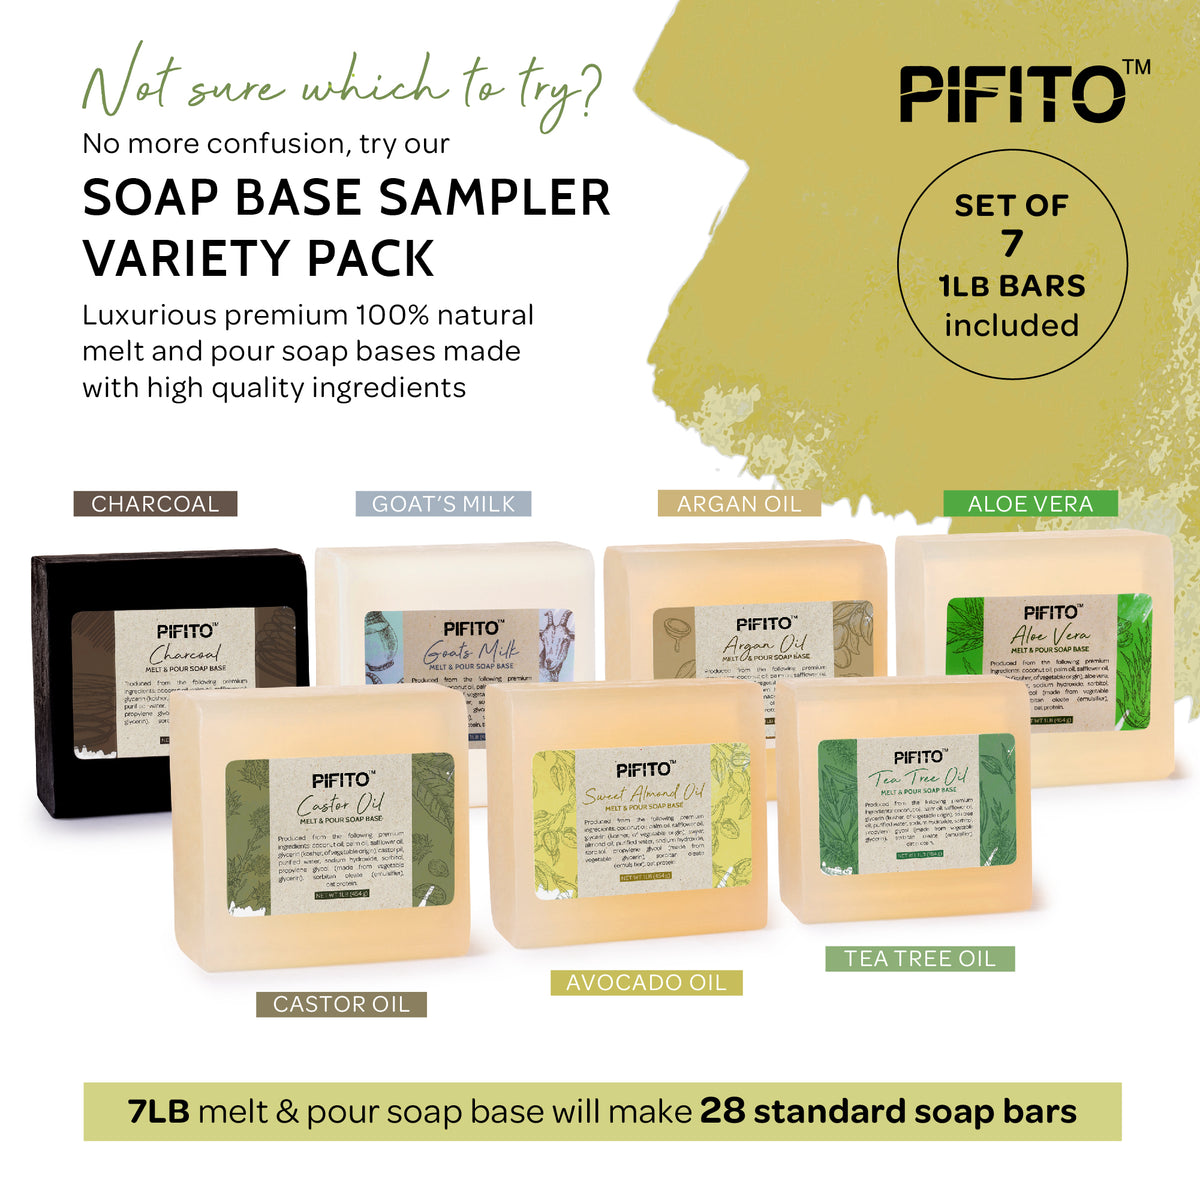 Pifito Olive Oil (32 oz) for Soap Making - Premium 100% Pure and Natural  Carrier Oil for Essential Oils, Skin Care, Hair and Body Oil